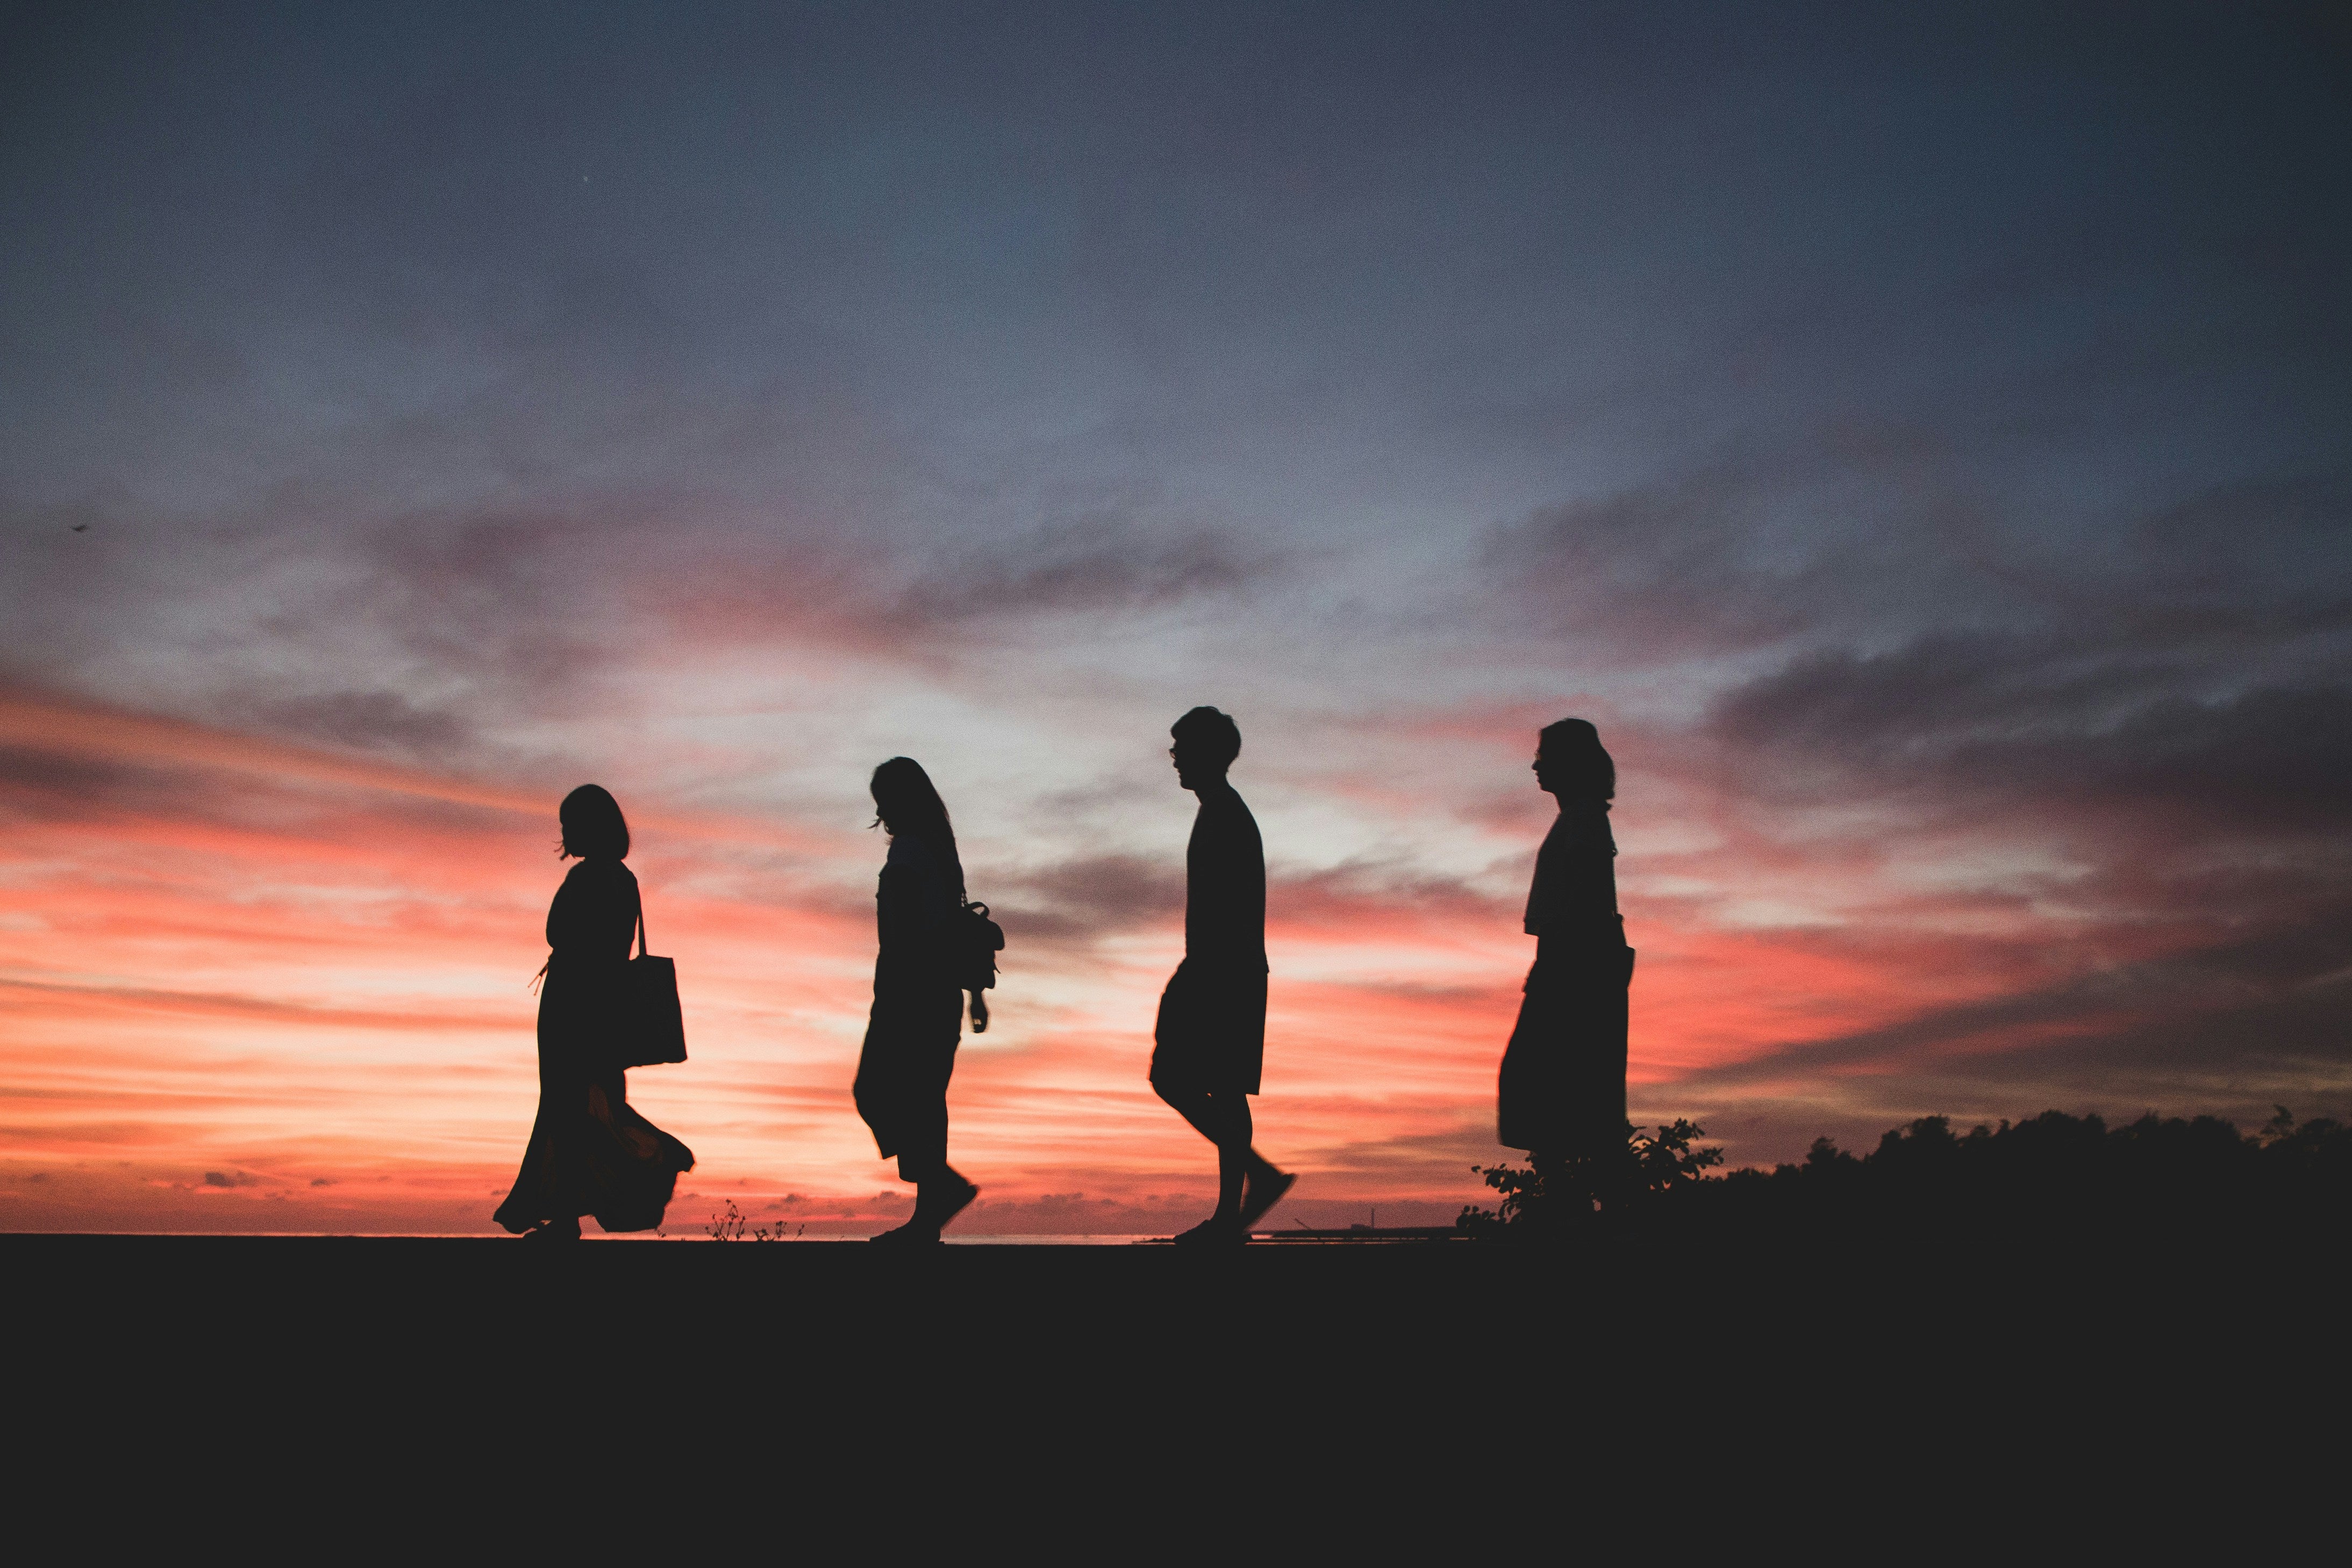 four silhouettes of people walking to the left, illuminated by a sunset in the background